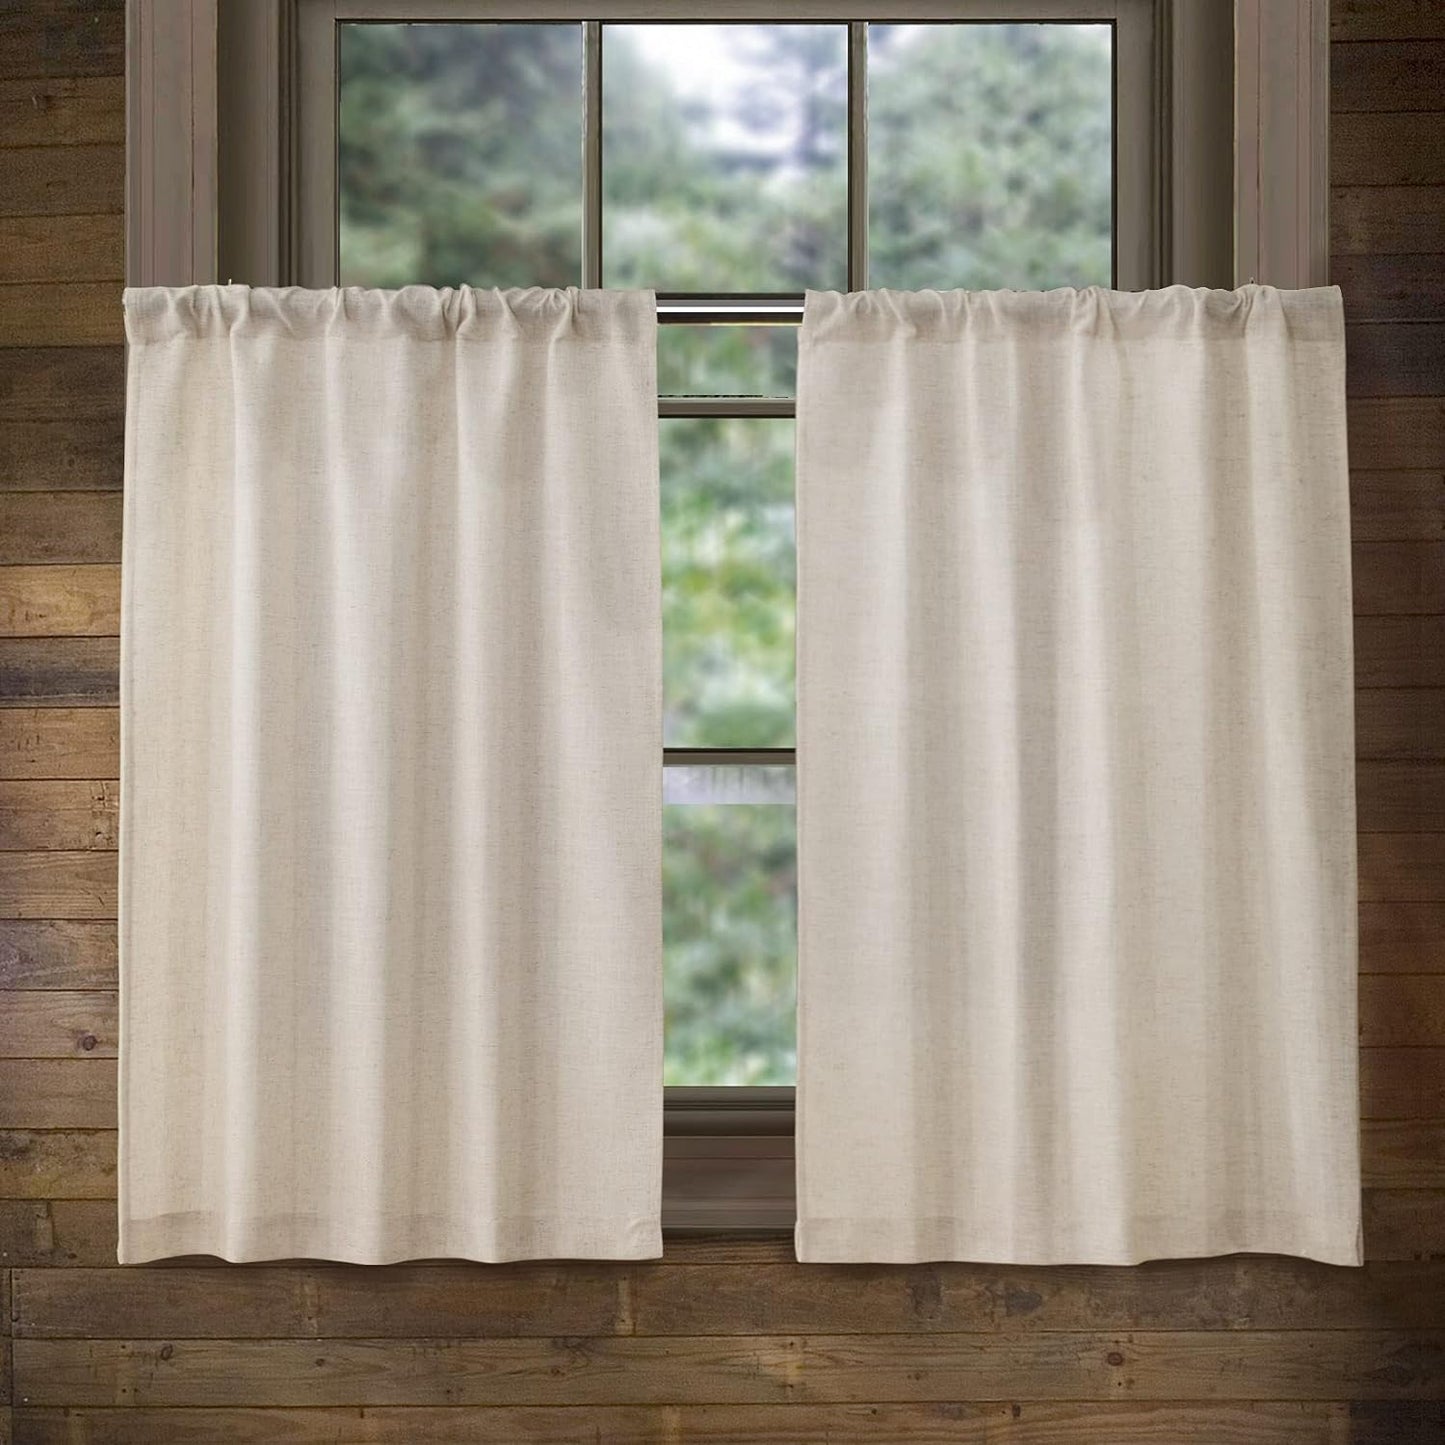 Valea Home Linen Kitchen Curtains 45 Inch Length Rustic Farmhouse Crude Short Cafe Curtains Rod Pocket Tiers for Small Window Bathroom Basement, Natural, 2 Panels  Valea Home 27"W X 36"L  